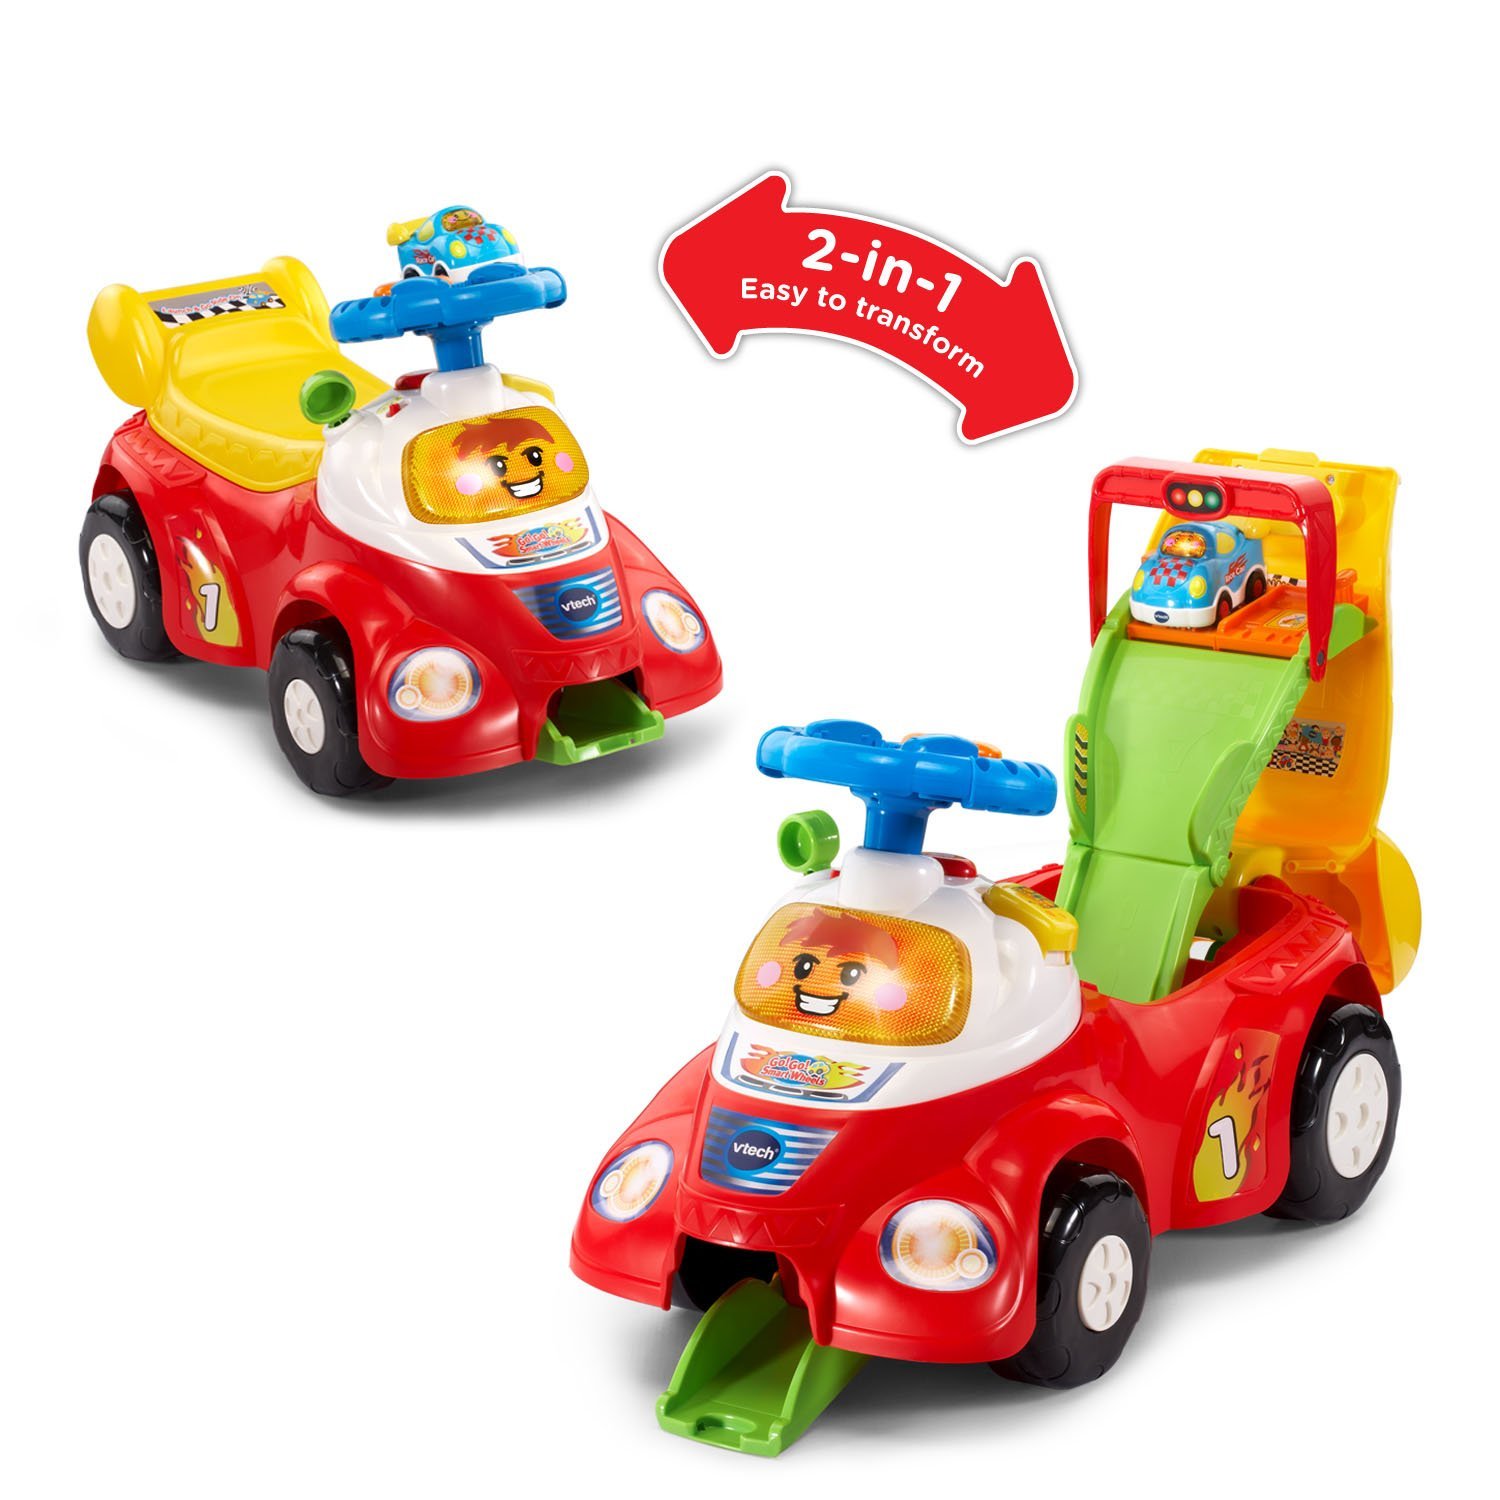 VTech Go! Go! Smart Wheels Launch and Go Ride On – Just $20.98!